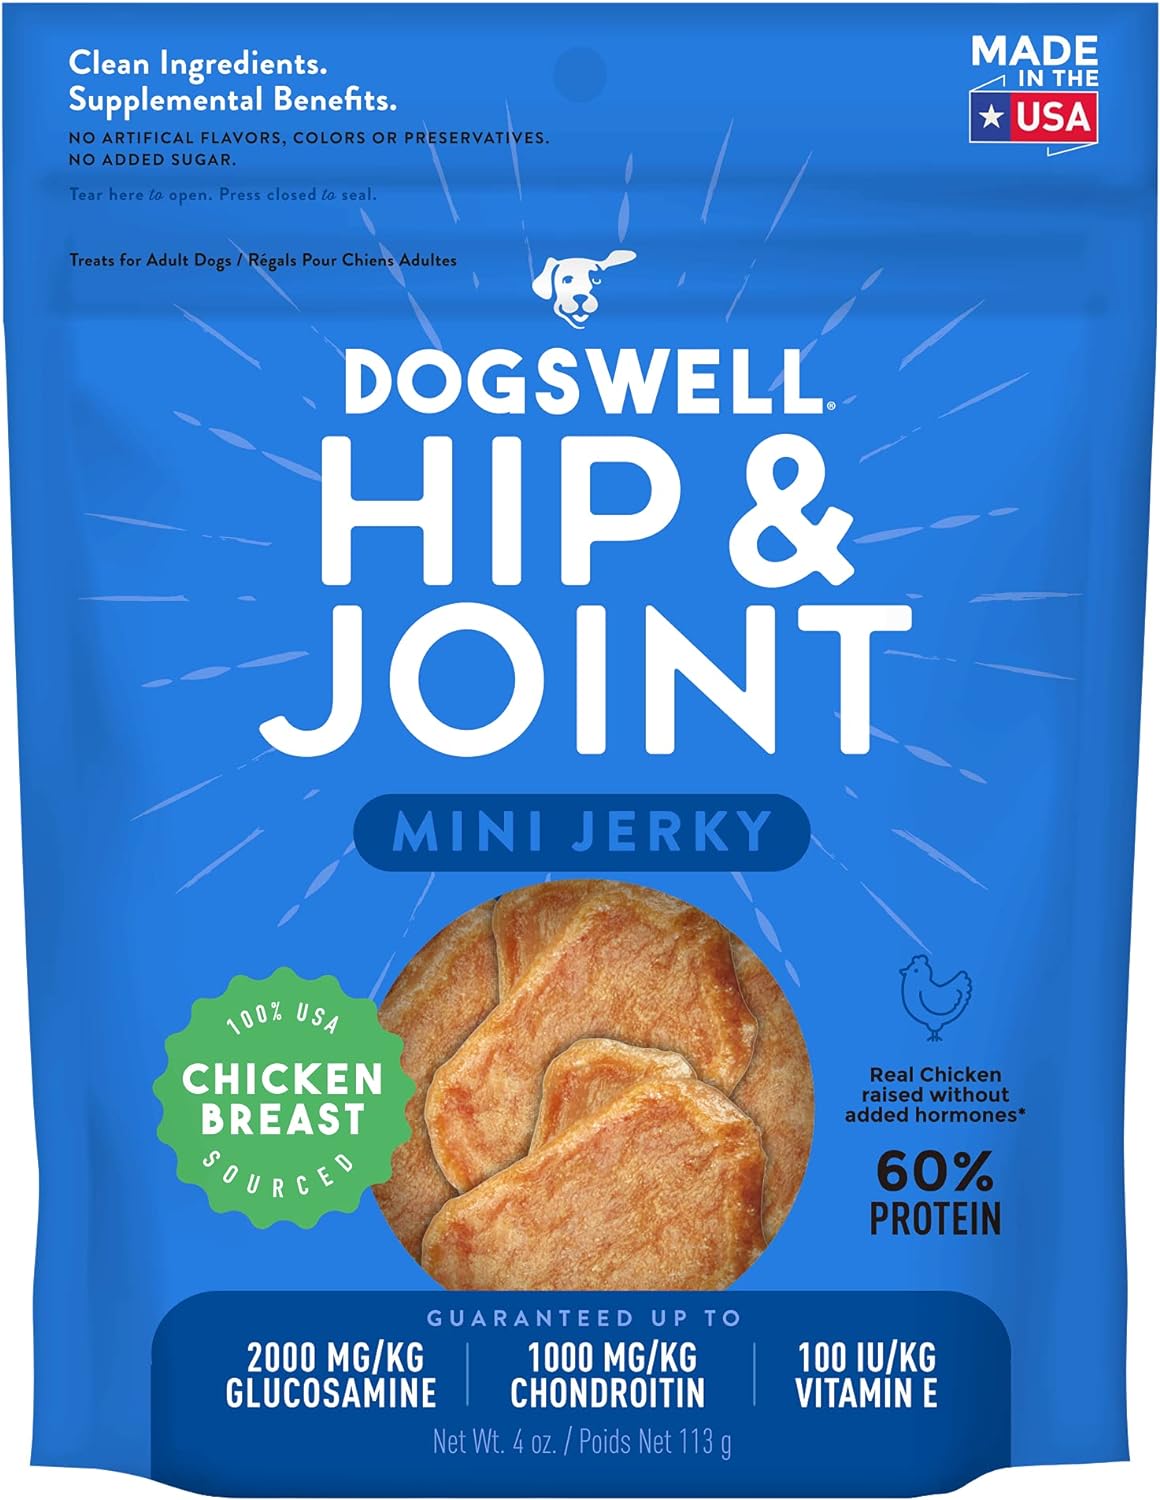 Dogswell Hip & Joint Mini Jerky Dog Treats, Chicken Breast, 4 oz. Pouch